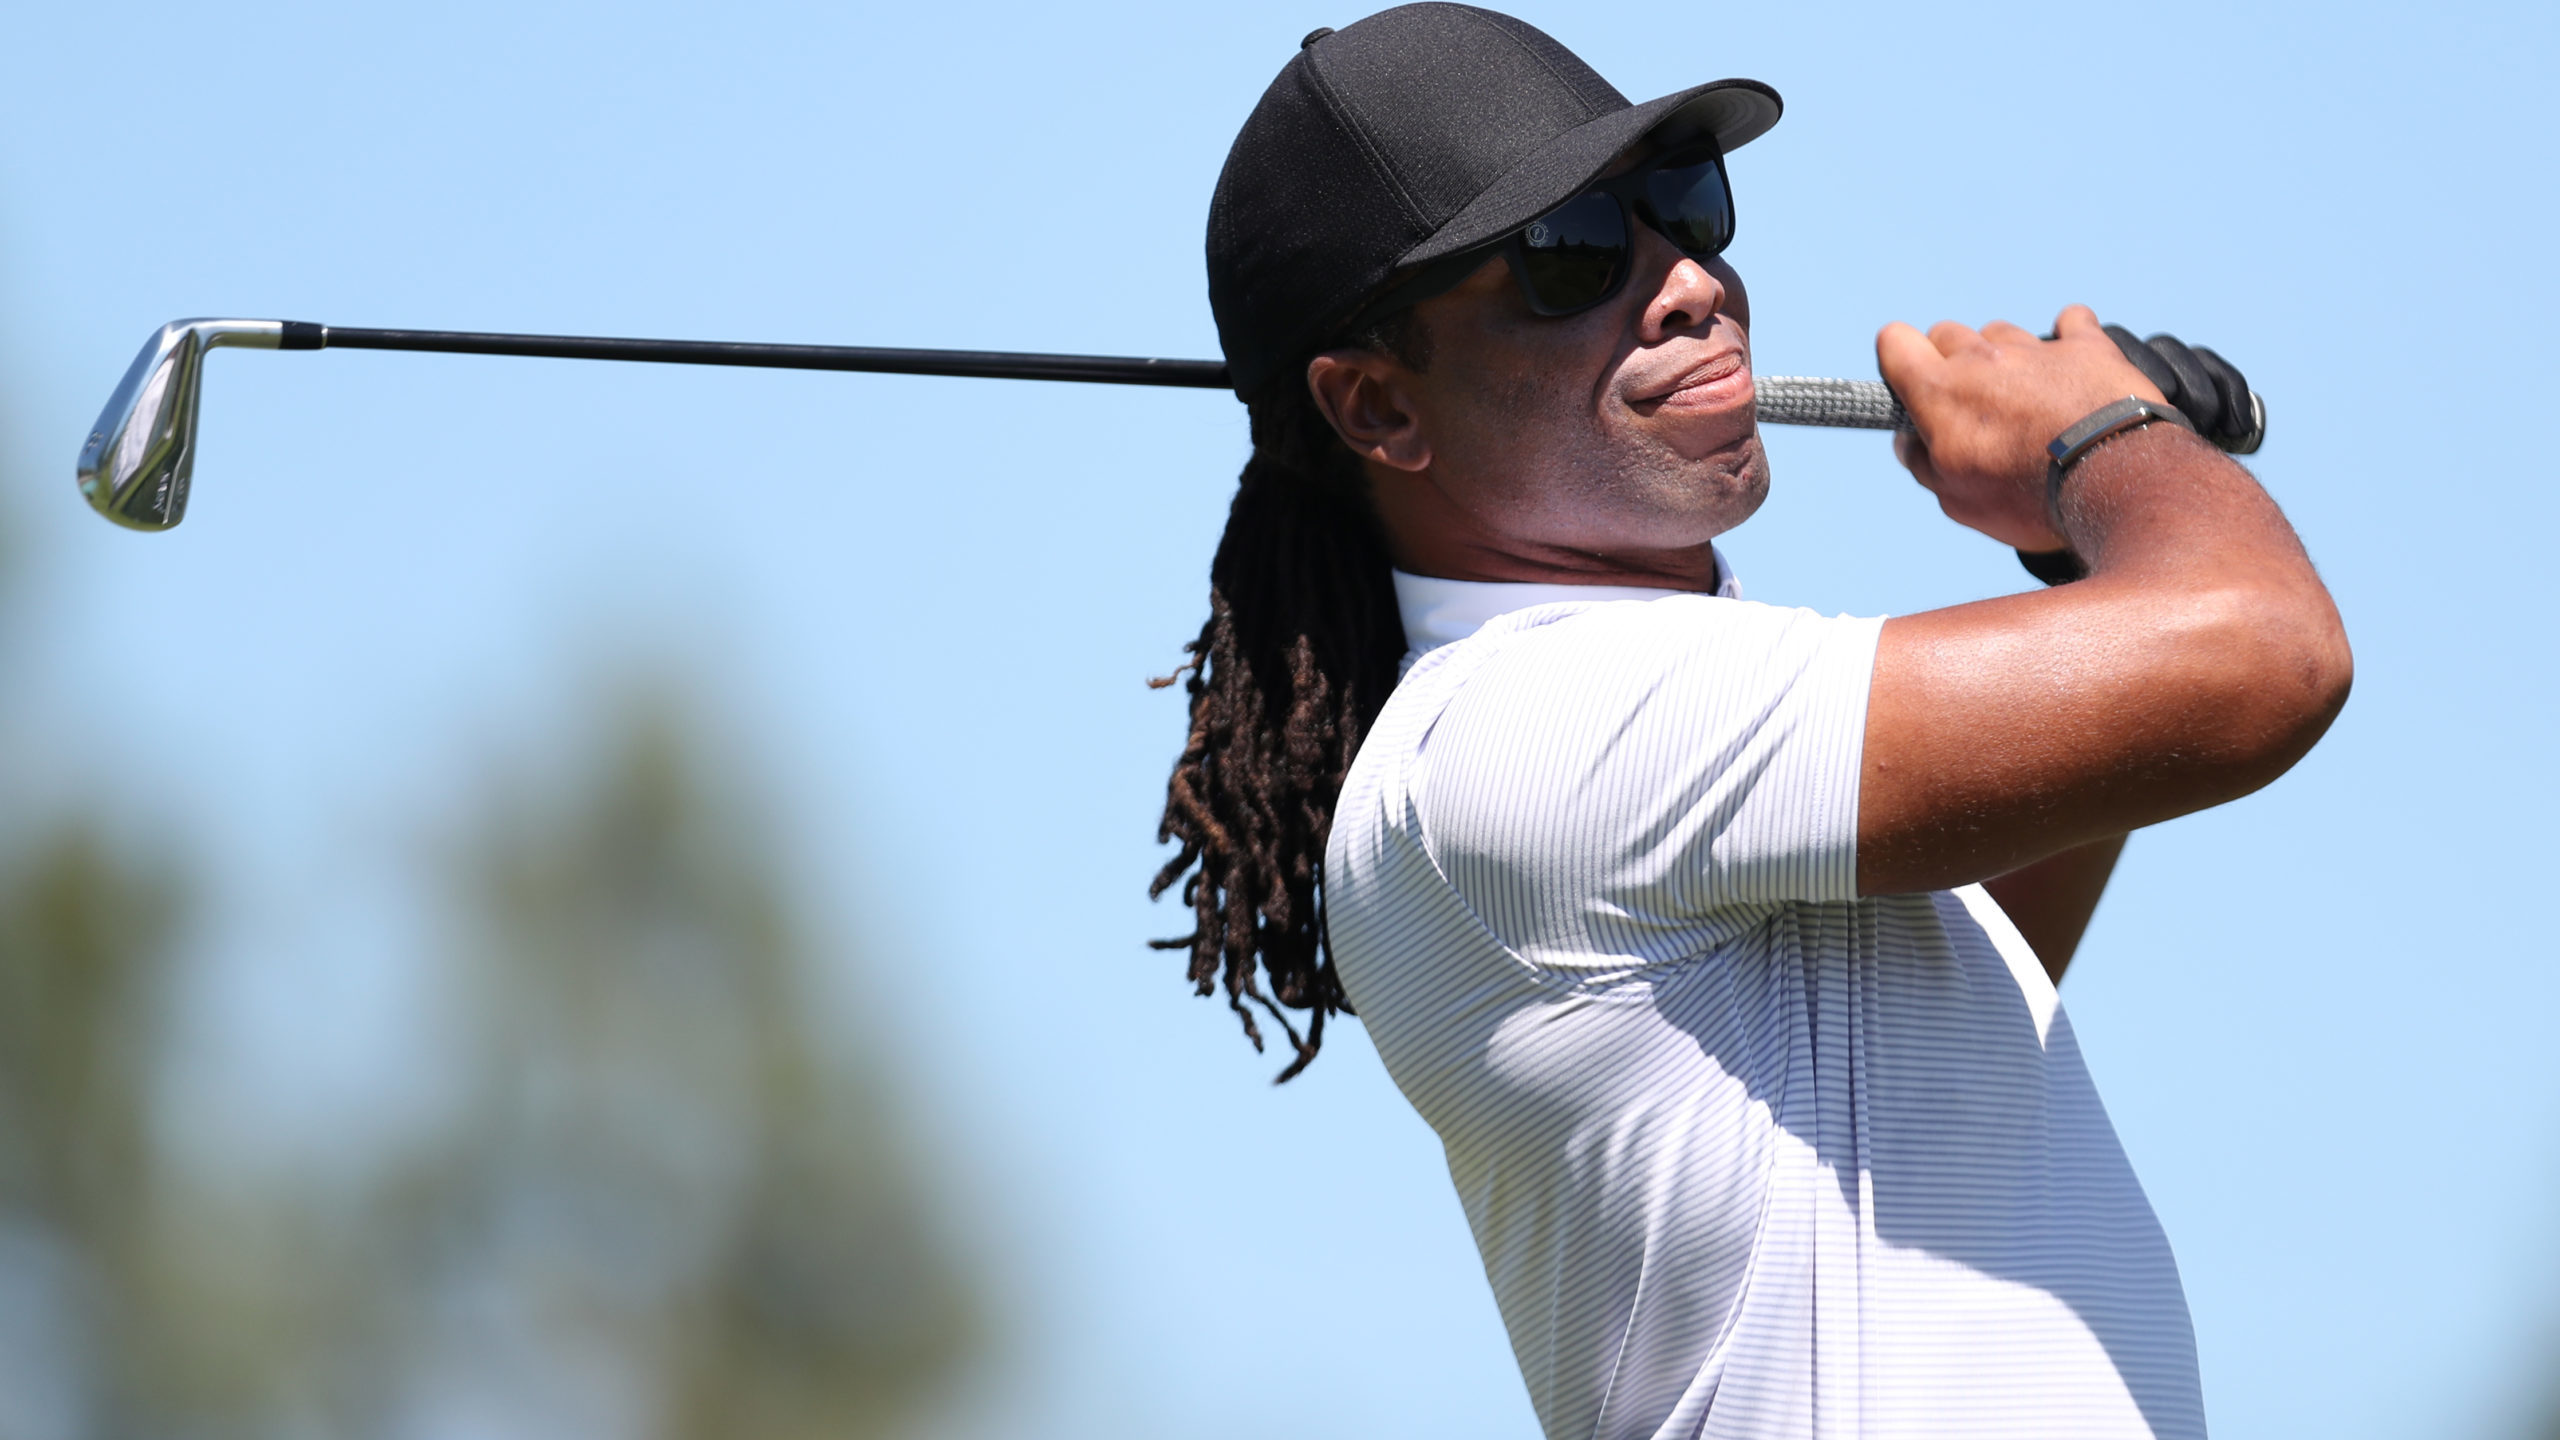 NFL athlete Larry Fitzgerald tees off on the first hole during round one of the American Century Ch...